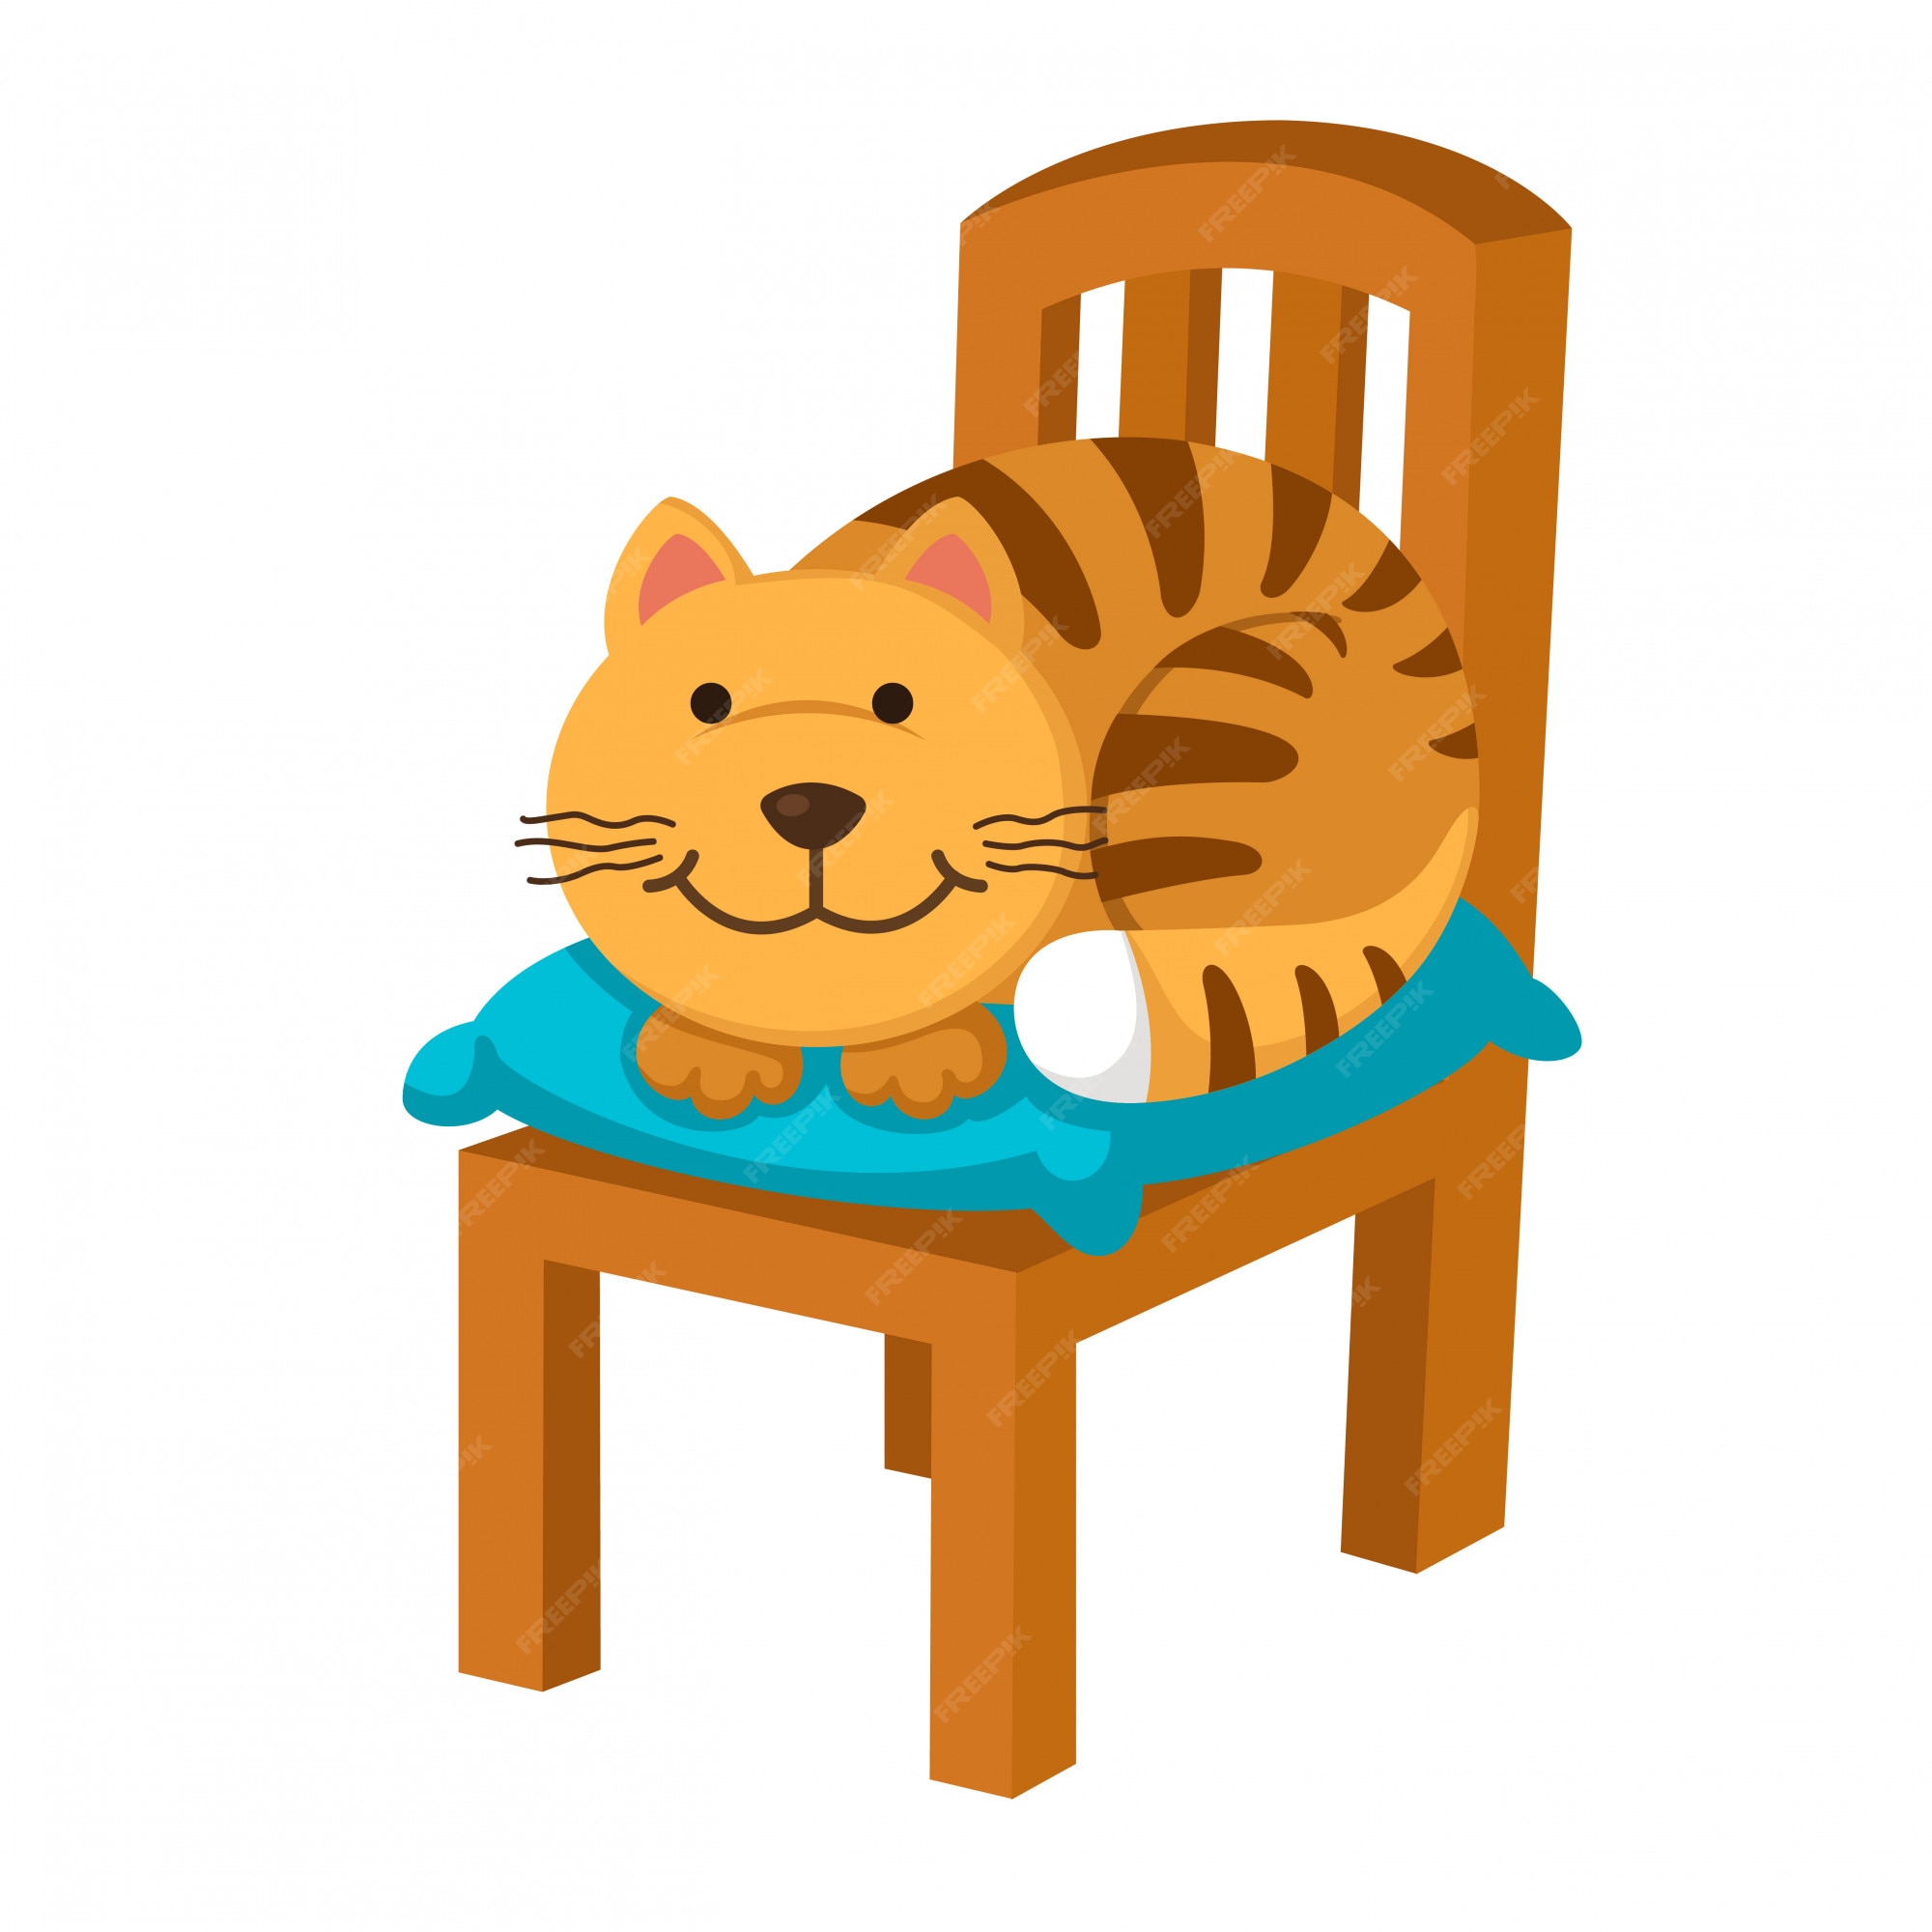 The cat is the chair